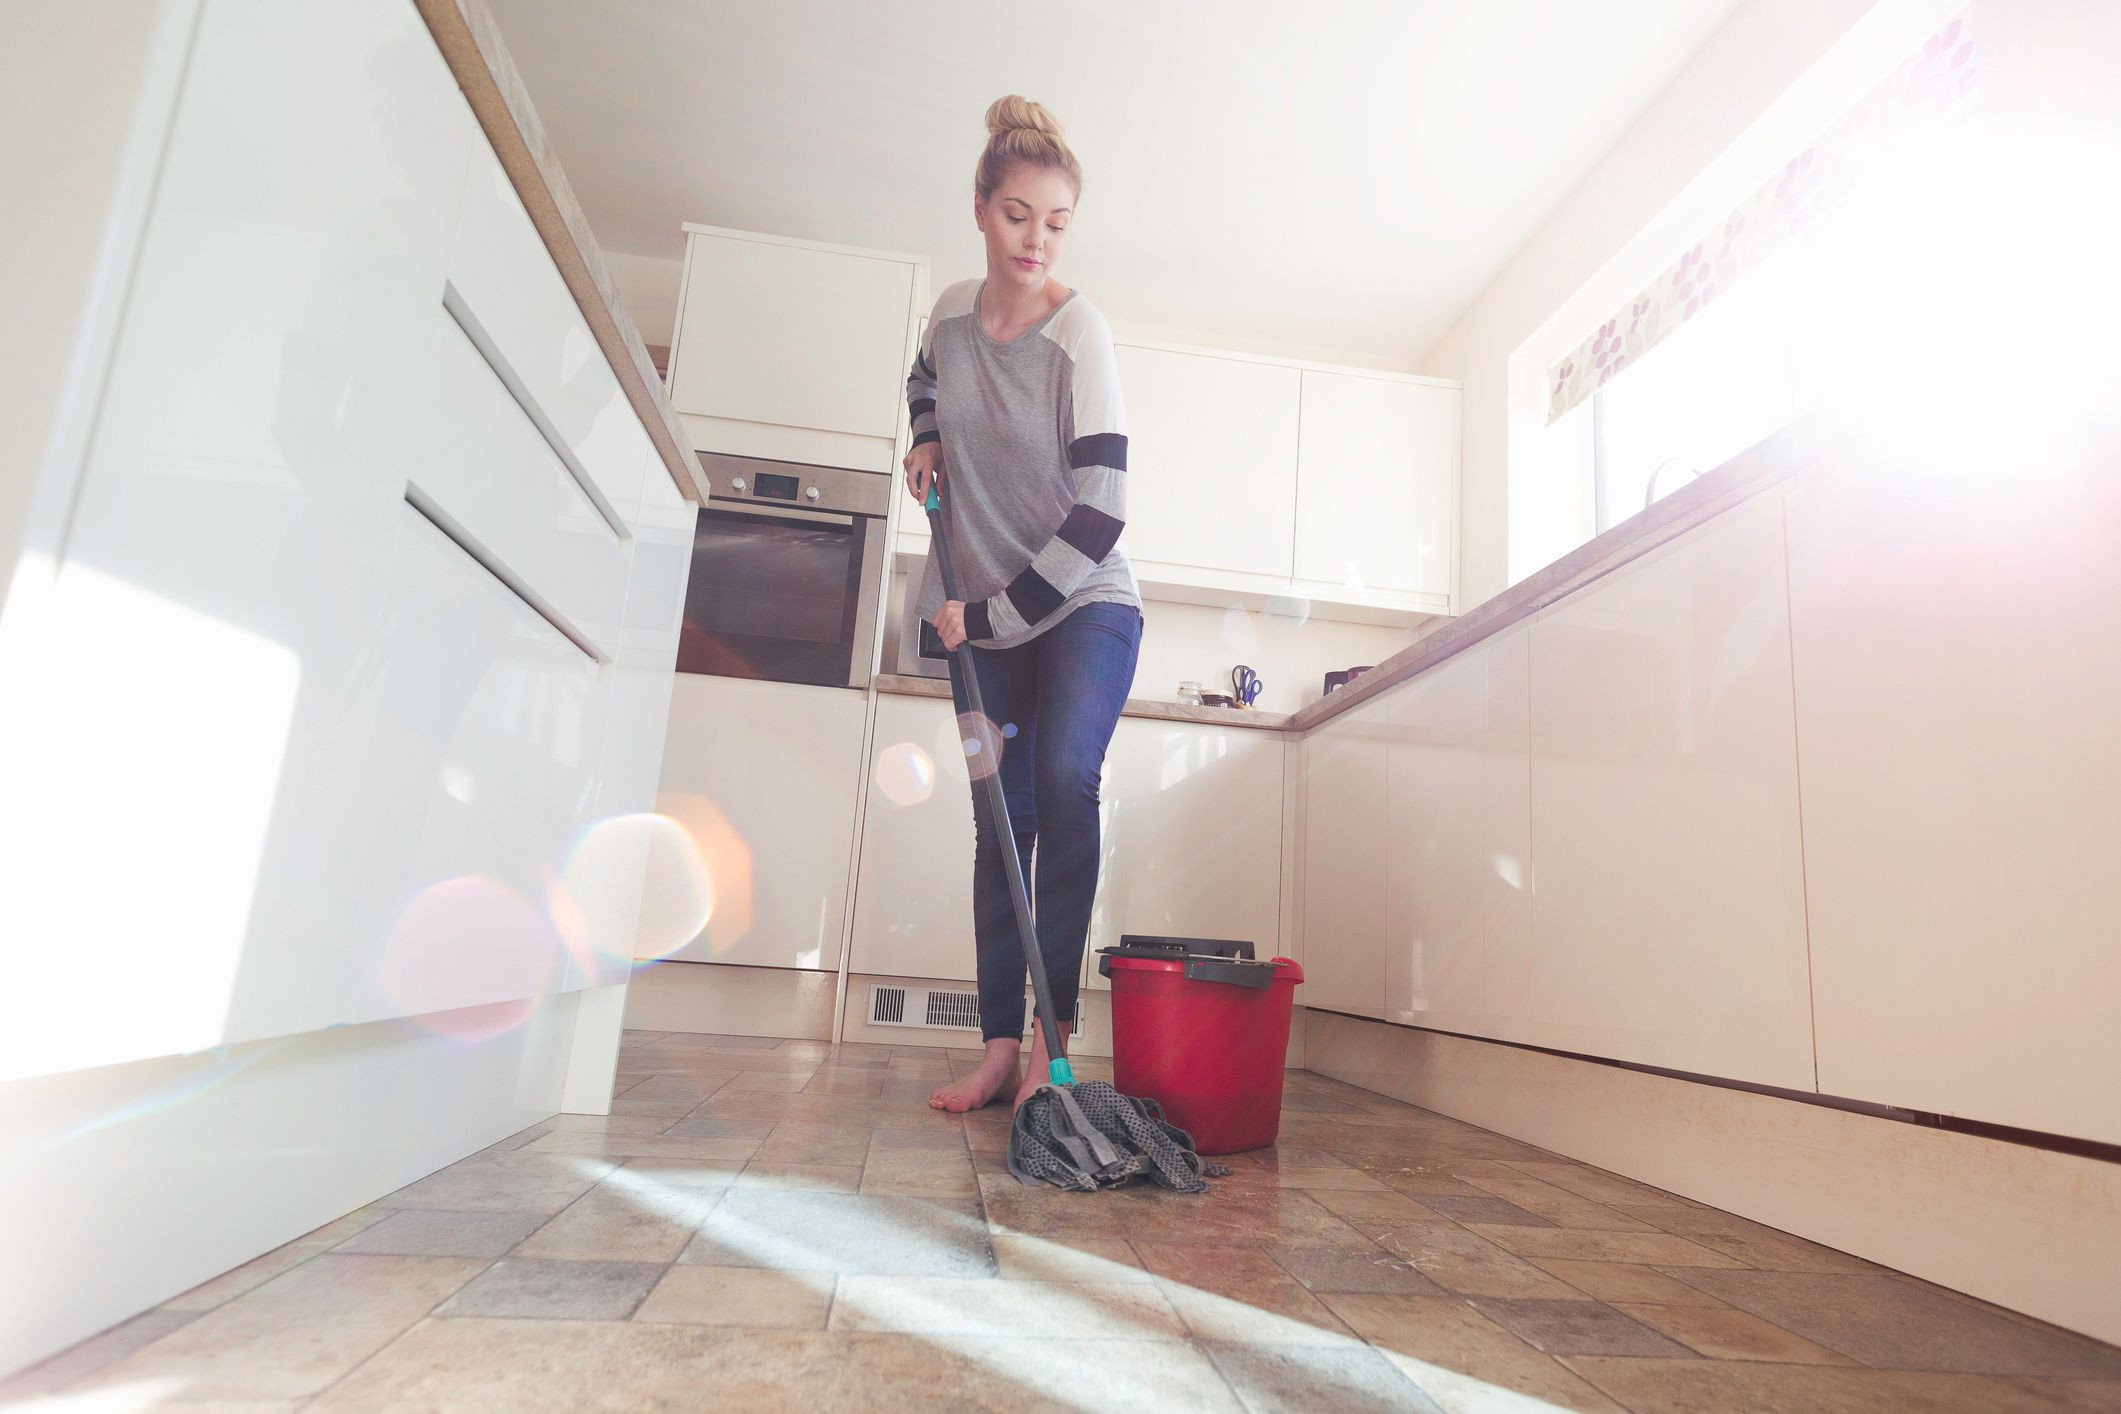 23 Awesome How Do You Clean Hardwood Floors with Vinegar 2024 free download how do you clean hardwood floors with vinegar of easy homemade mopping solutions intended for woman mopping floor gettyimages 499652484 58937d343df78caebcbeee89